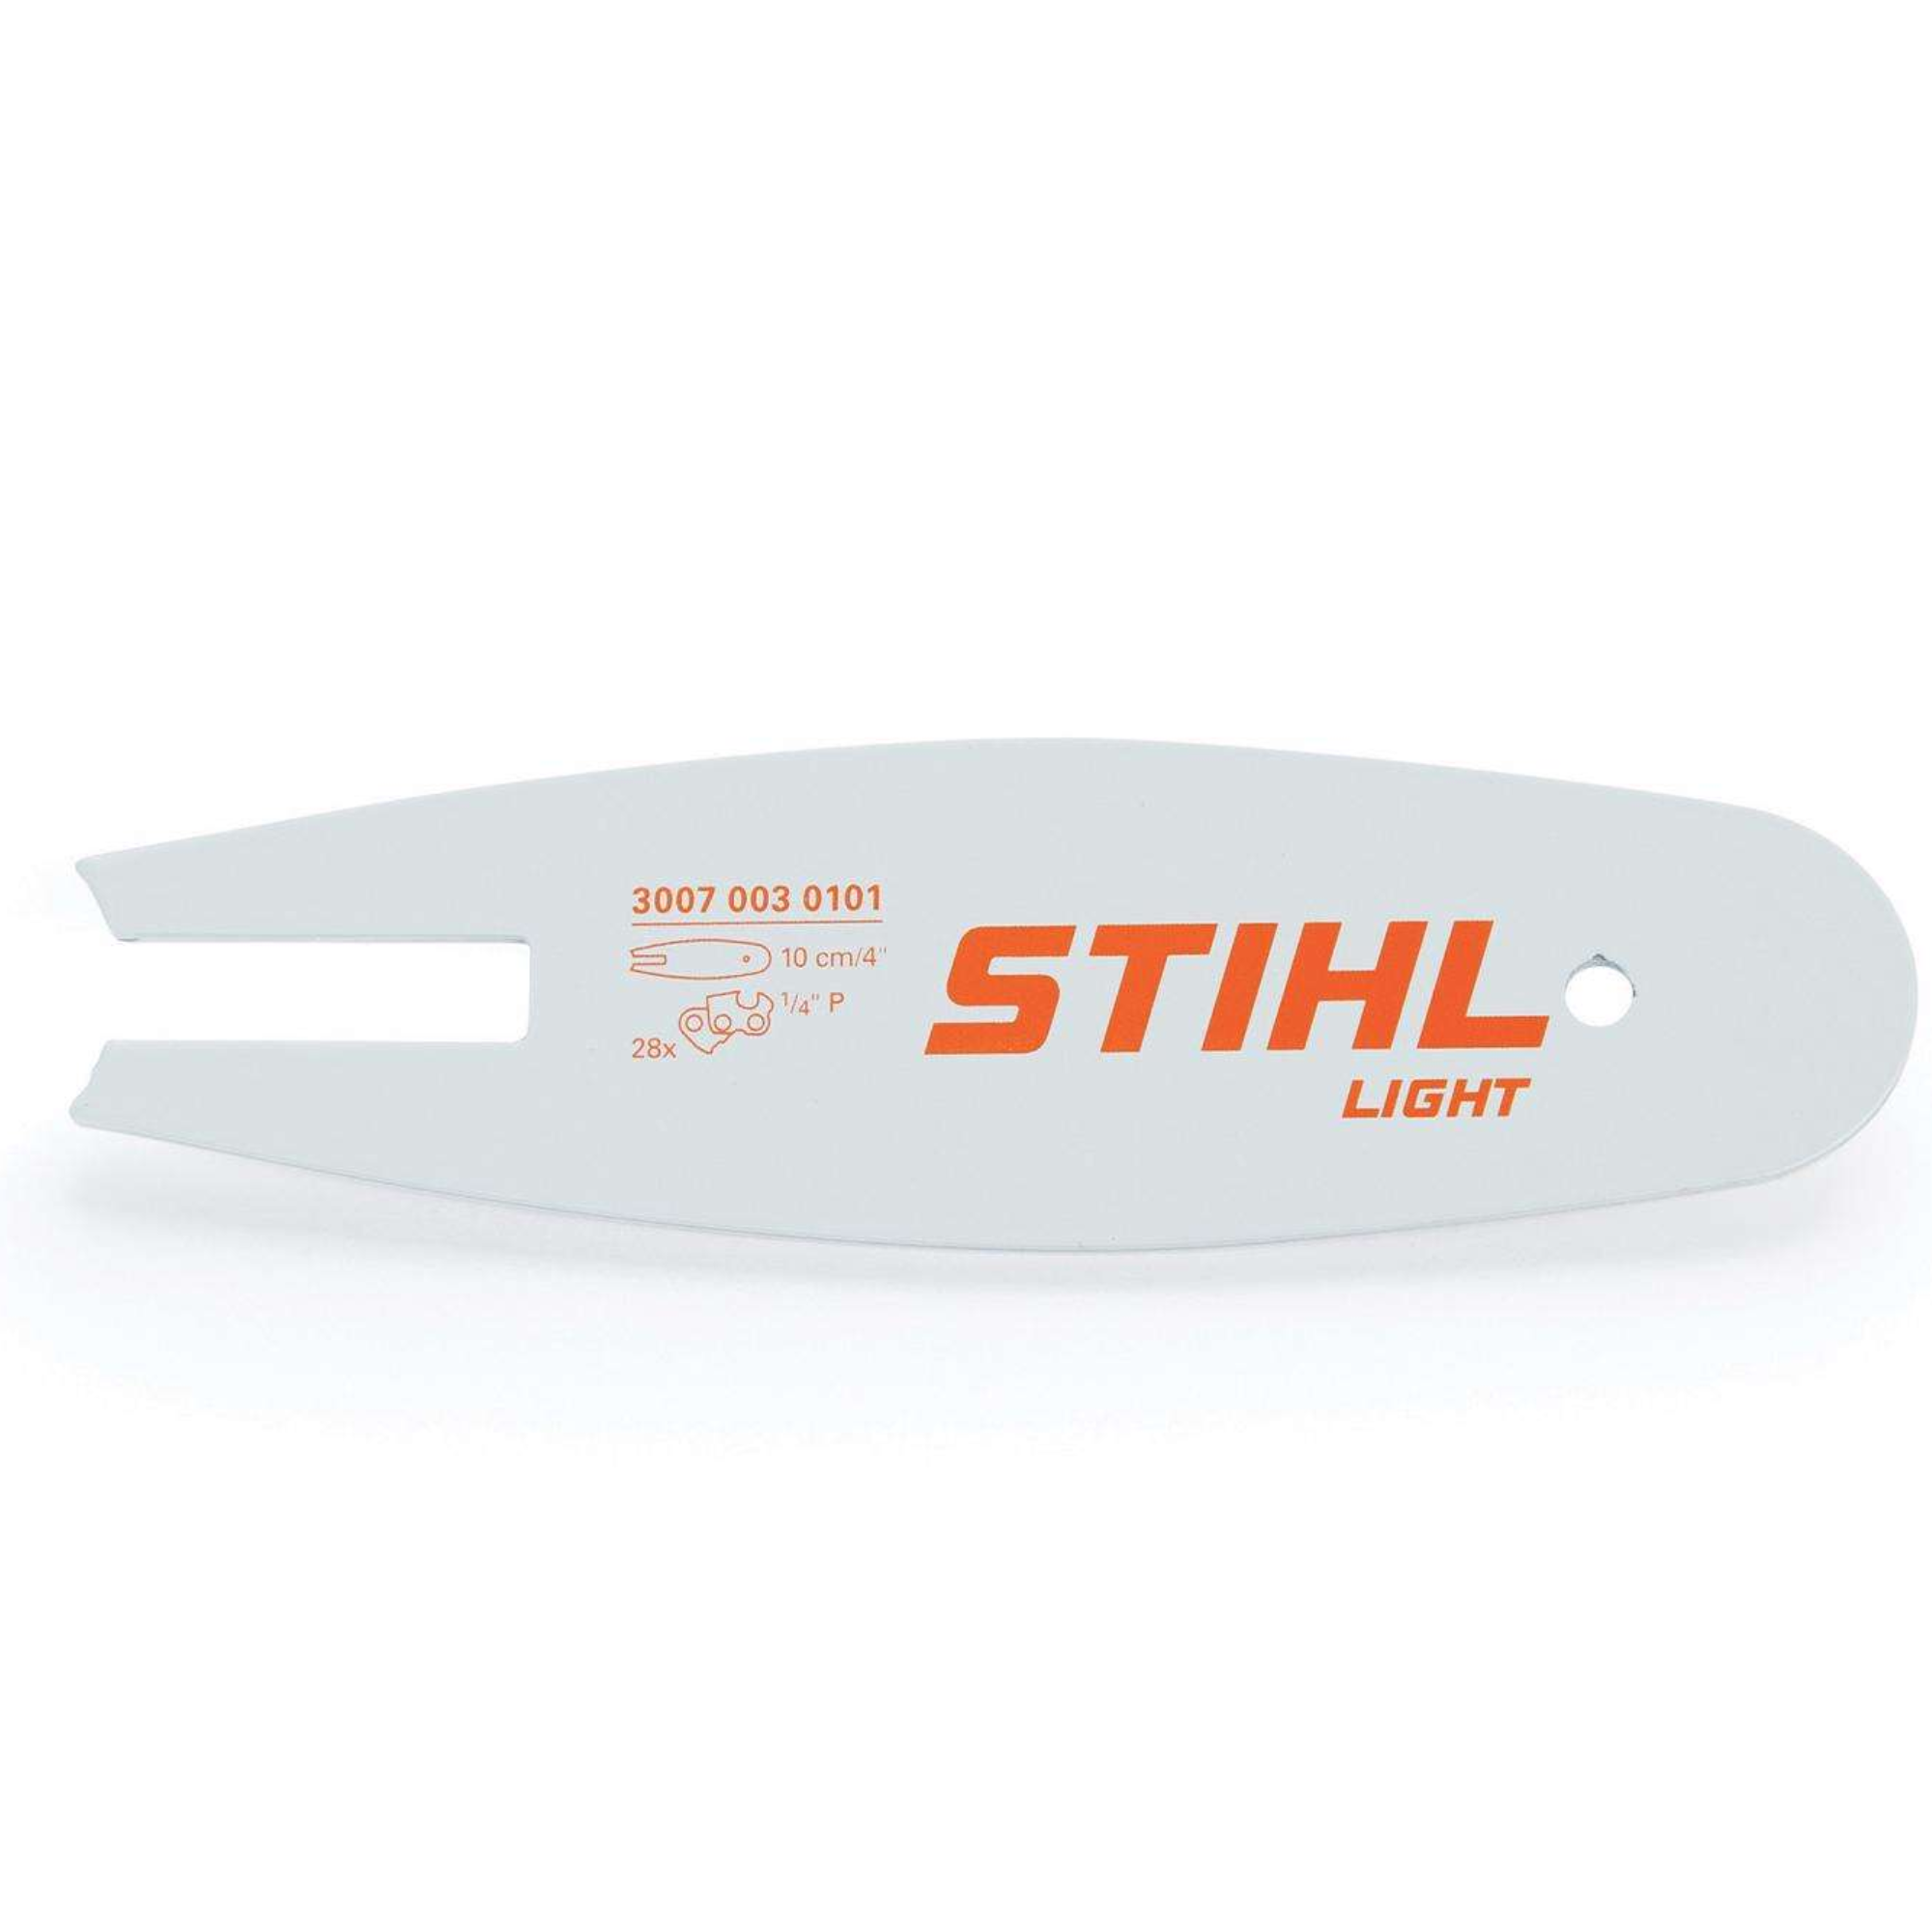 Stihl 4" Replacement bar for GTA 26 | 3007 003 0101